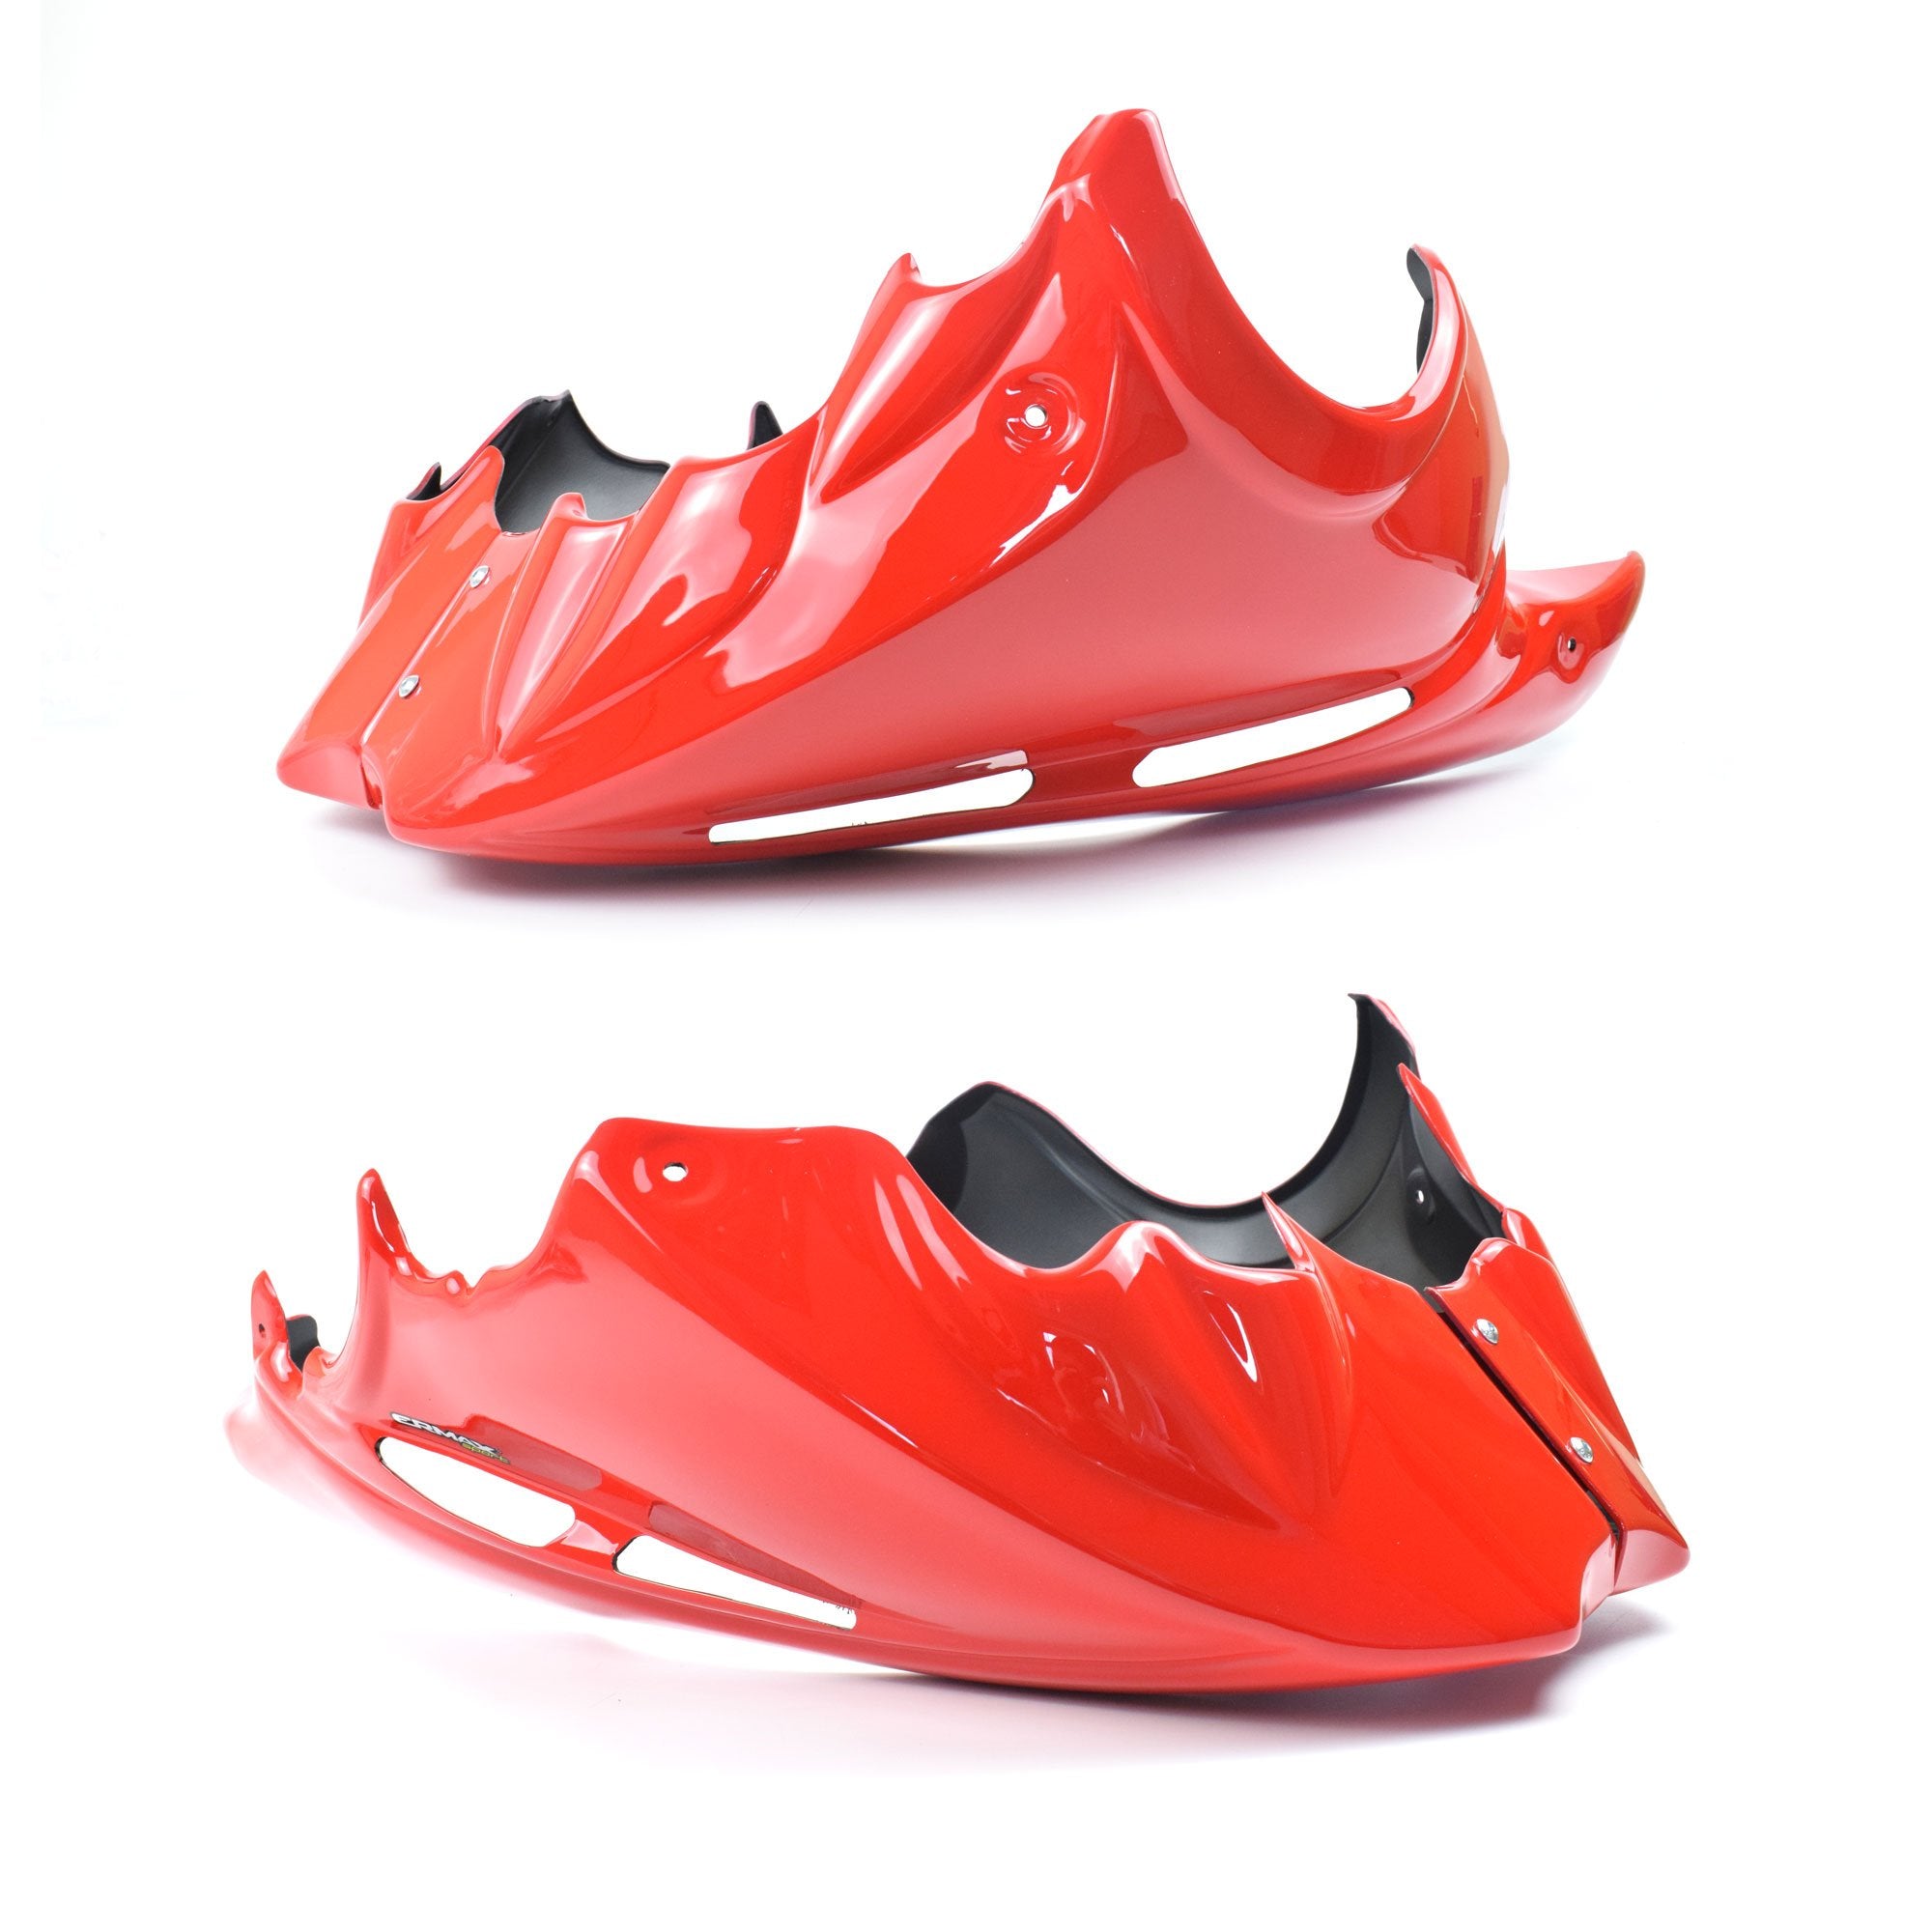 Ermax Belly Pan | Gloss Red (Passion Red) | Kawasaki Z 1000 2003>2004-E890319054-Belly Pans-Pyramid Motorcycle Accessories